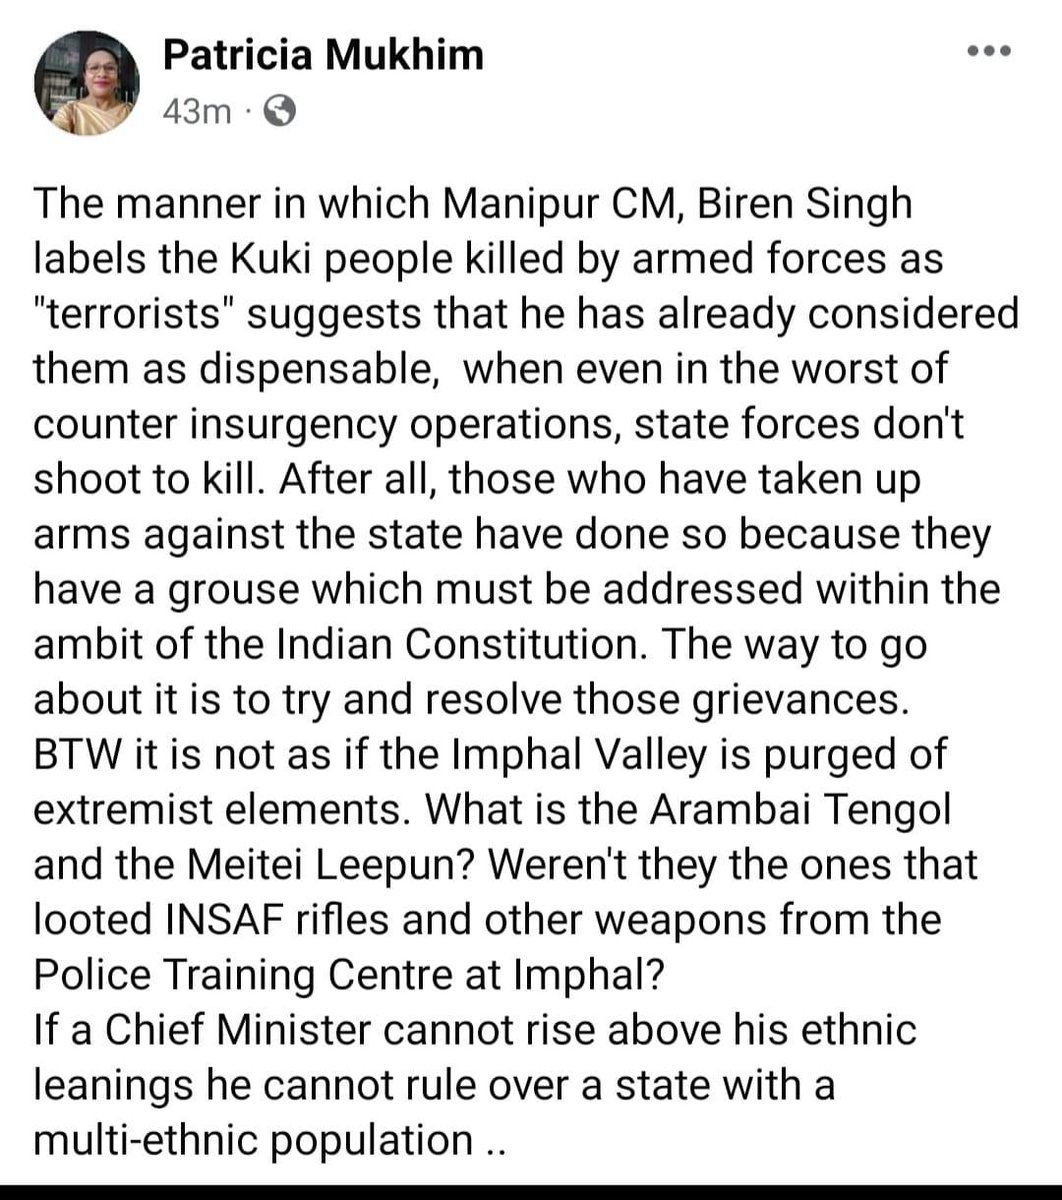 'Biren Singh labels the Kuki people killed by armed forces as 'Terrorists' suggests that he has already considered them as dispensable.'
'If a Chief Minister cannot rise above ethnic learnings, he cannot rule over a state with a multi-ethnic population ' quoted Patricia Mukhim.